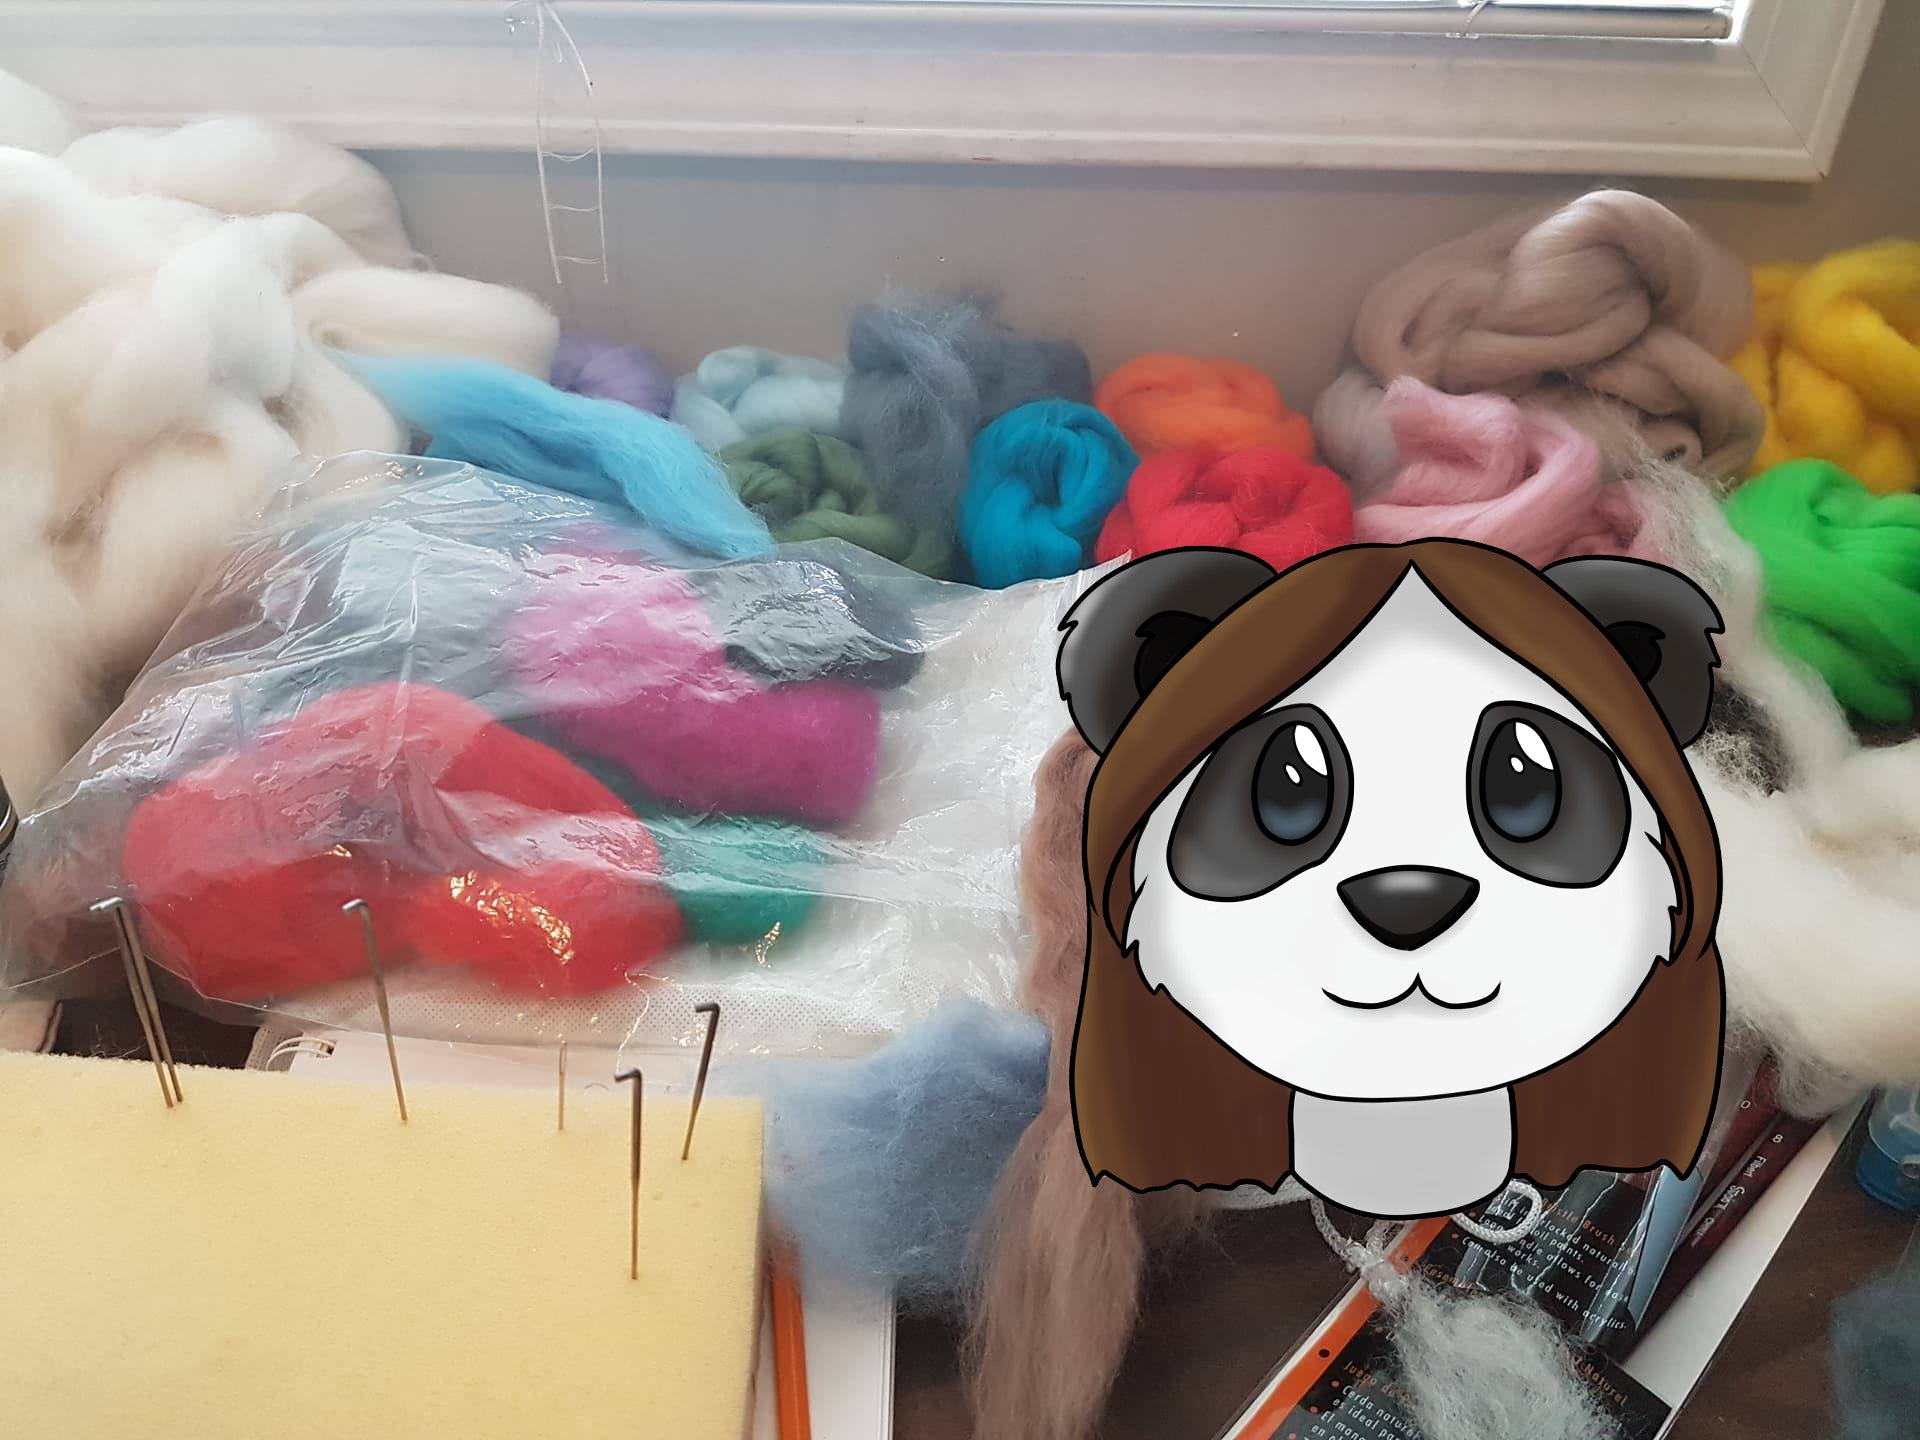 Let's Talk About Felting - Day 21